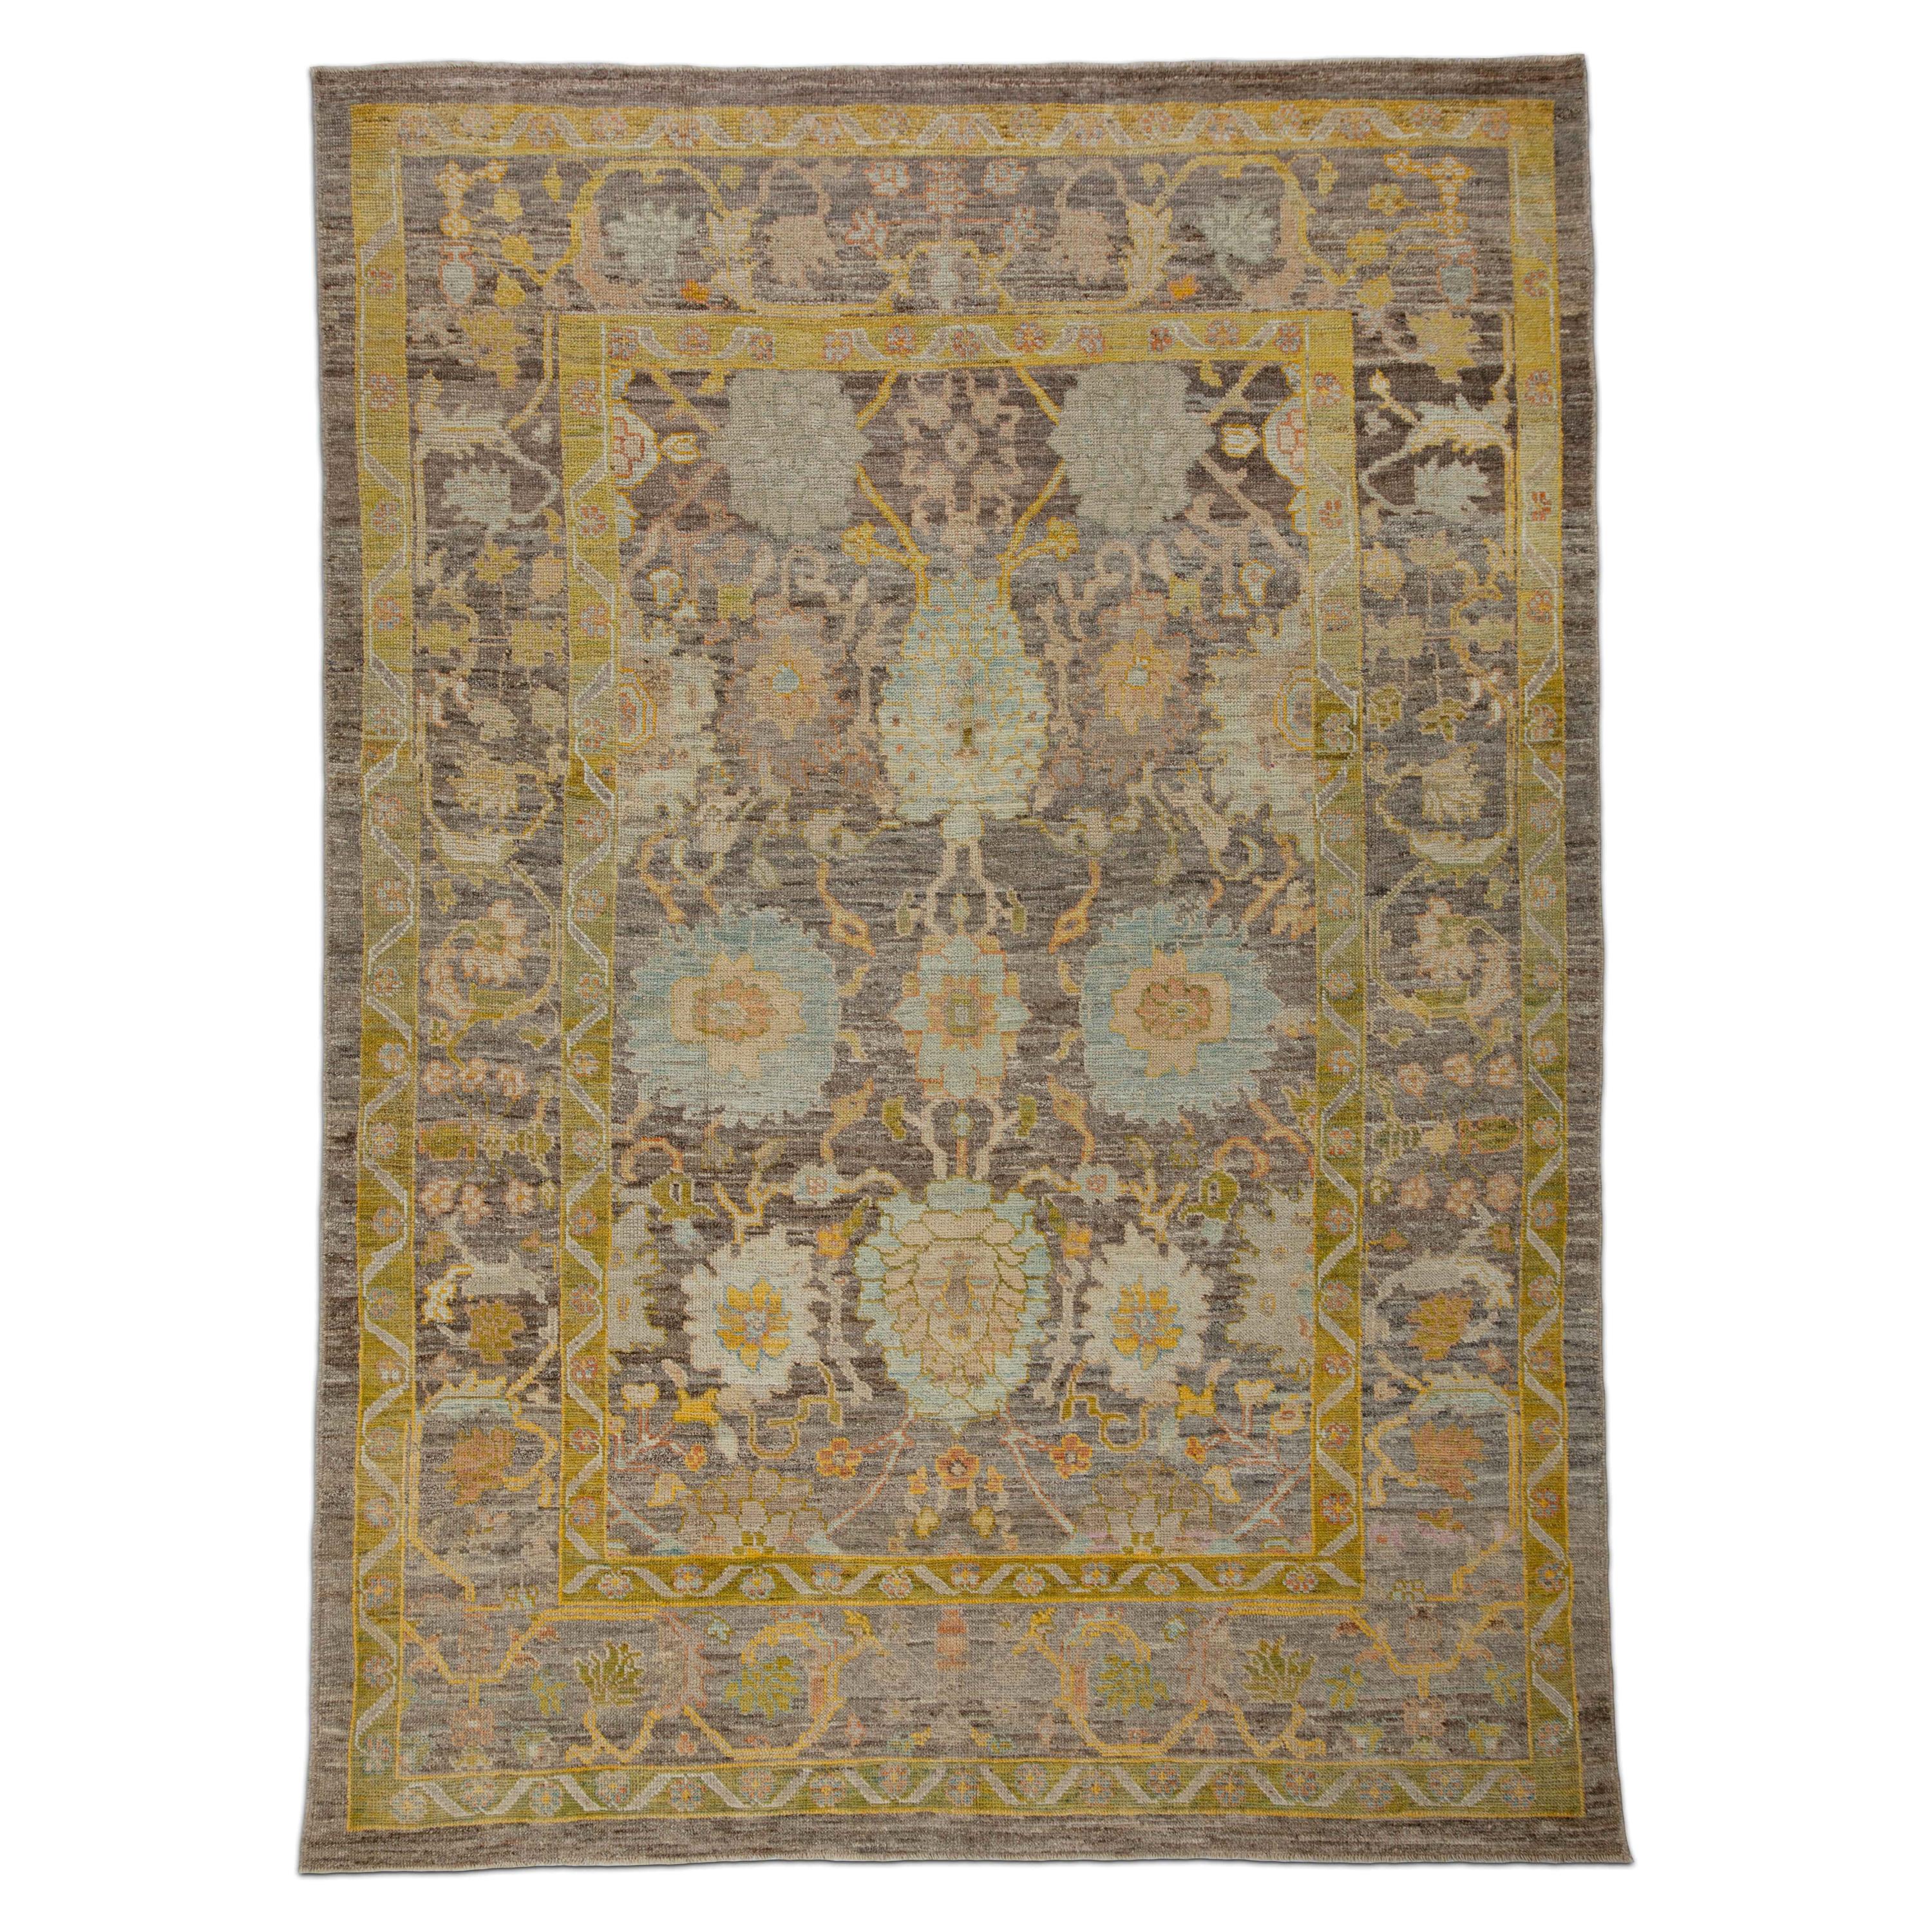 Contemporary Turkish Oushak Rug with Brown Field and Floral Details All-Over